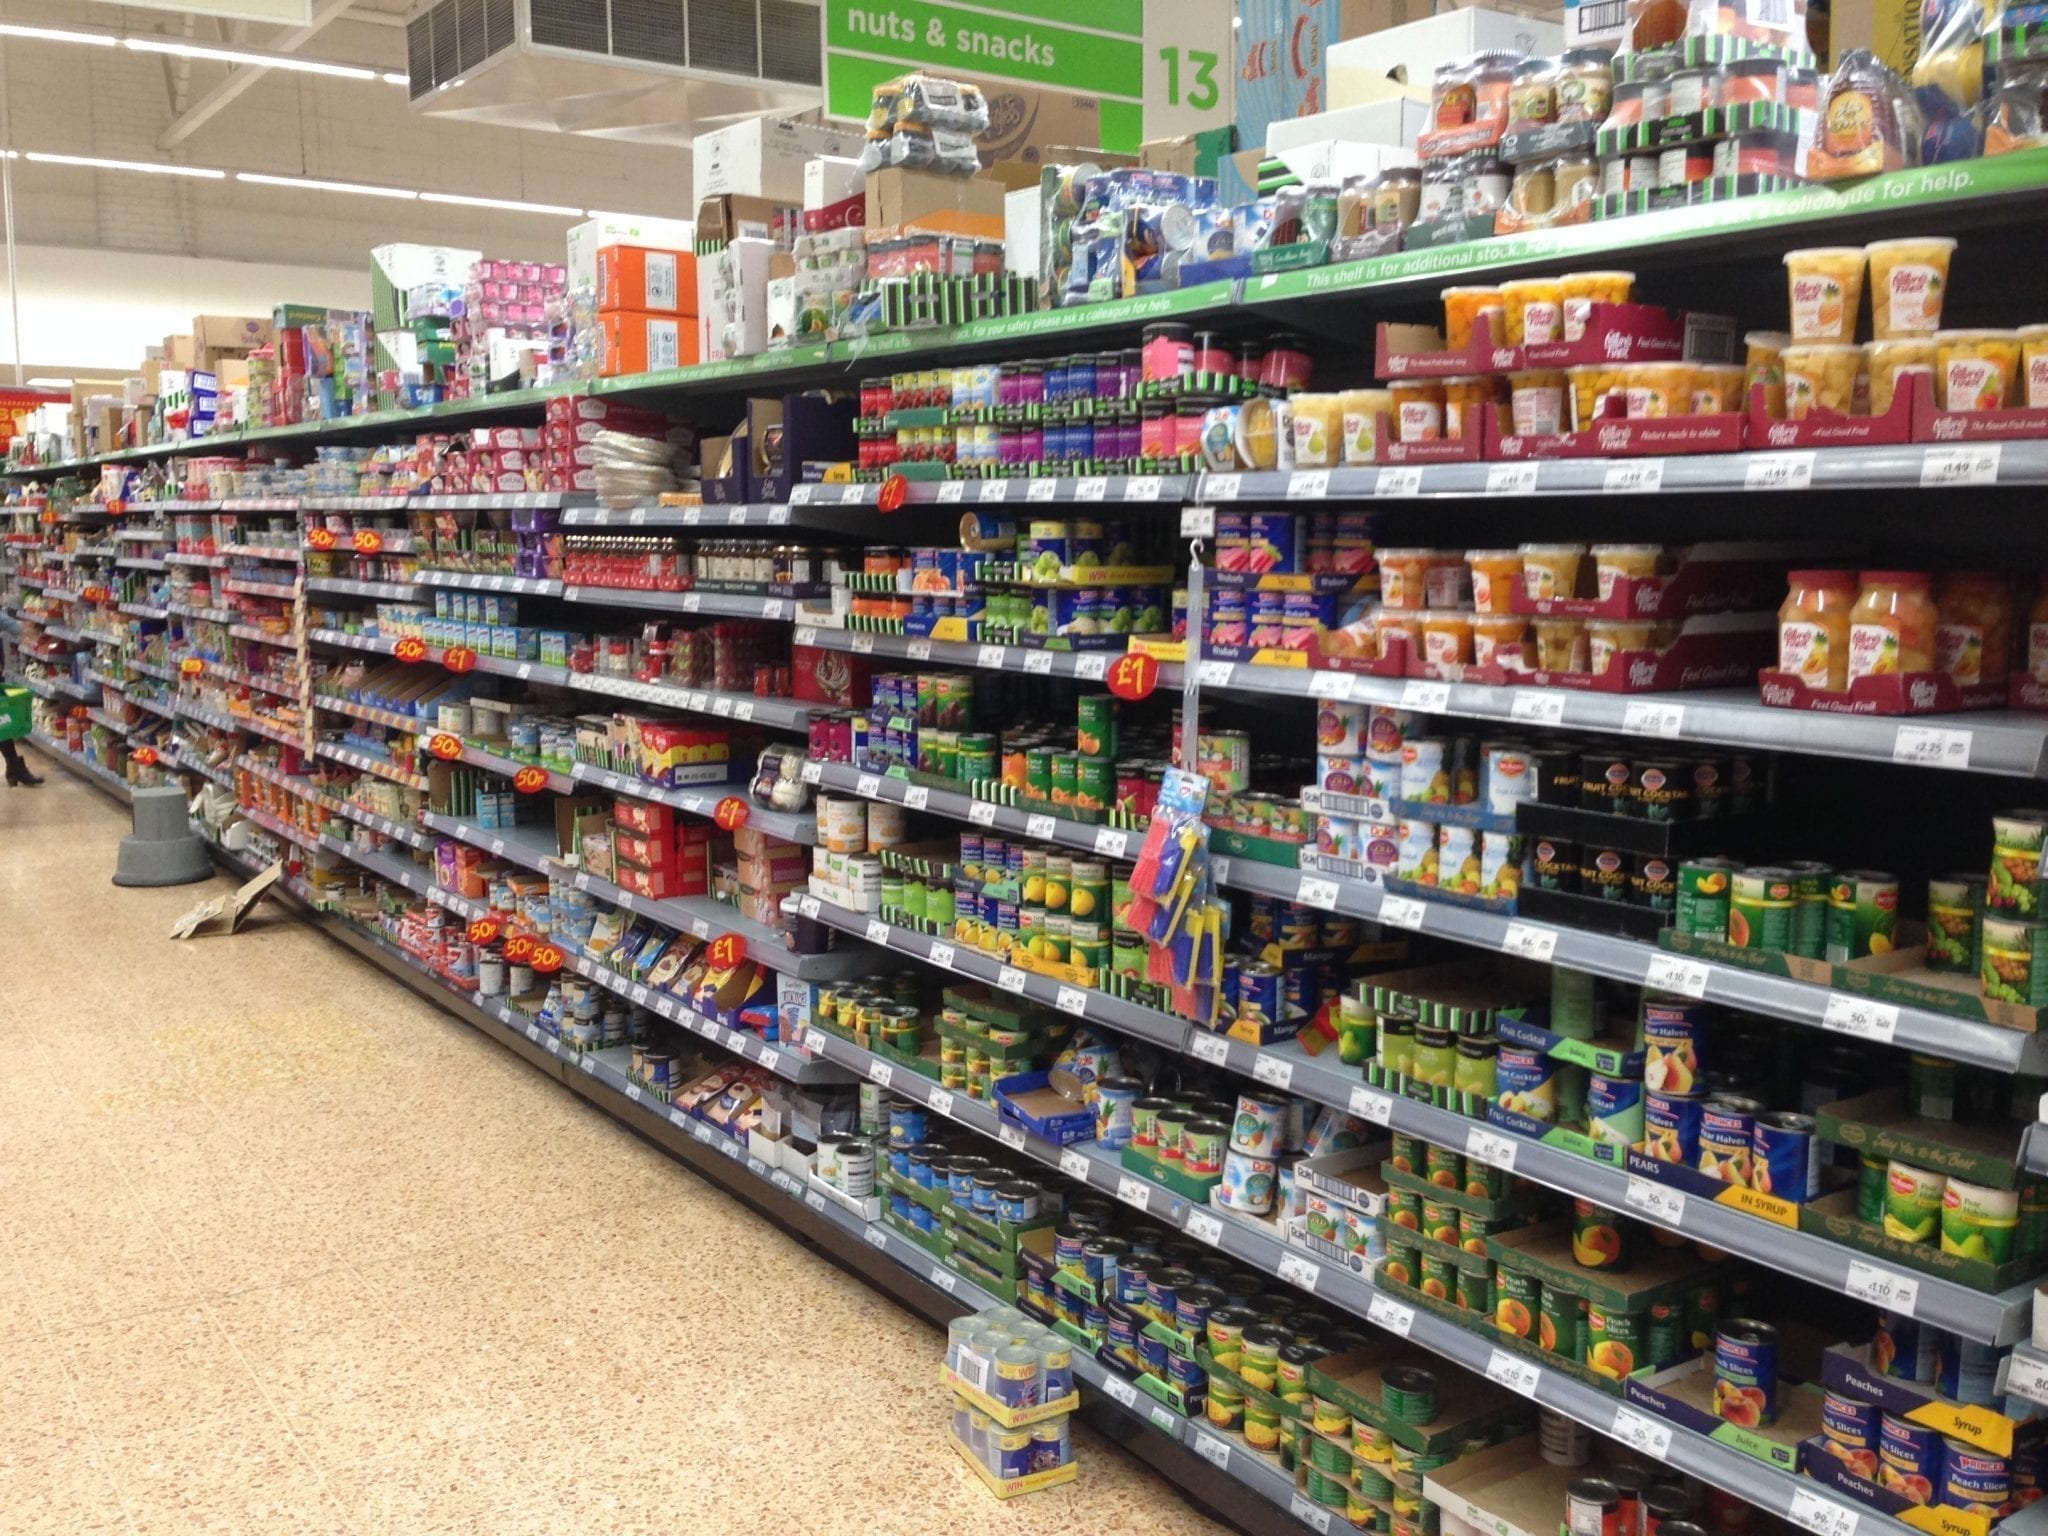 A full supermarket shelf lined with many tins